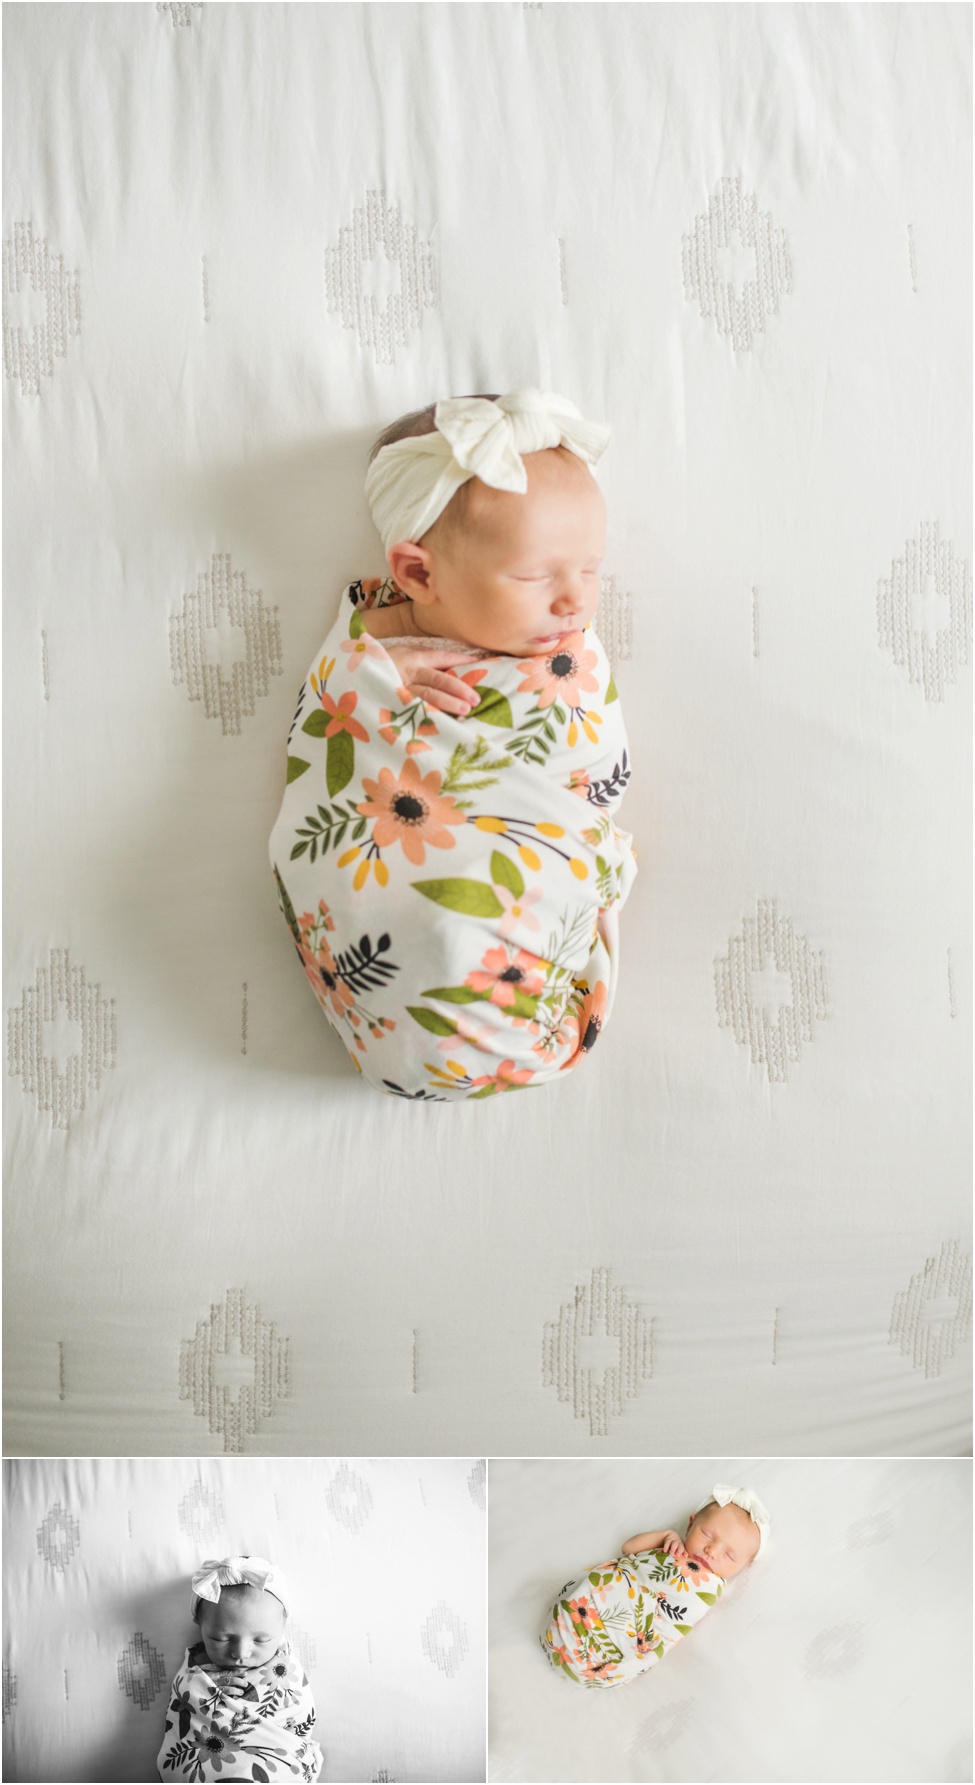 Blessed with baby girl. Ponte Vedra newborn photographer. 10 days old baby sister. At home family newborn session. Baby photographer Jacksonville, Neptune Beach, St. Augustine Florida